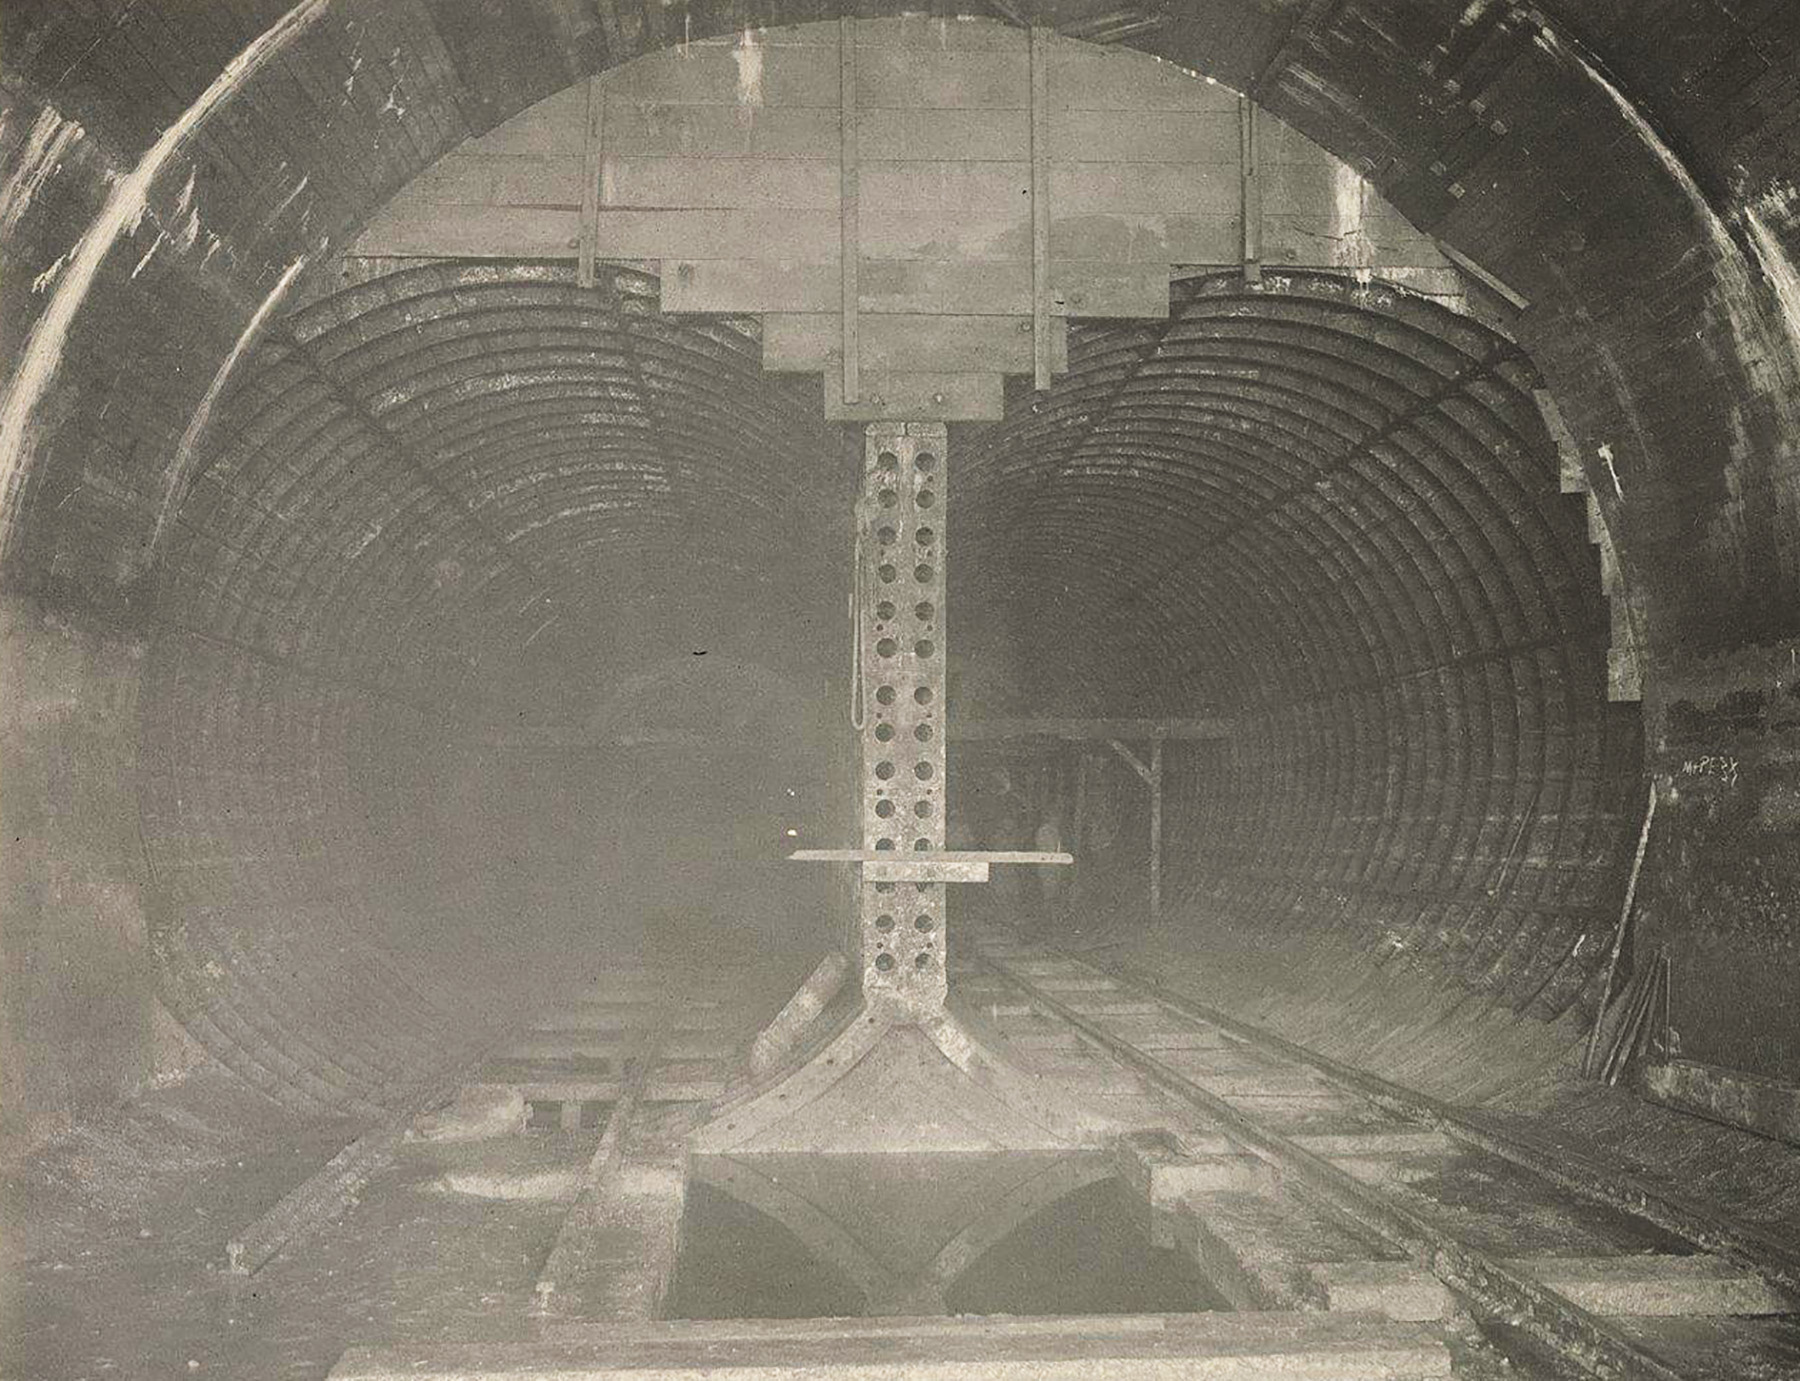 Photograph shows the interior of a subway tunnel with its parallel steel tubes and tracks. 